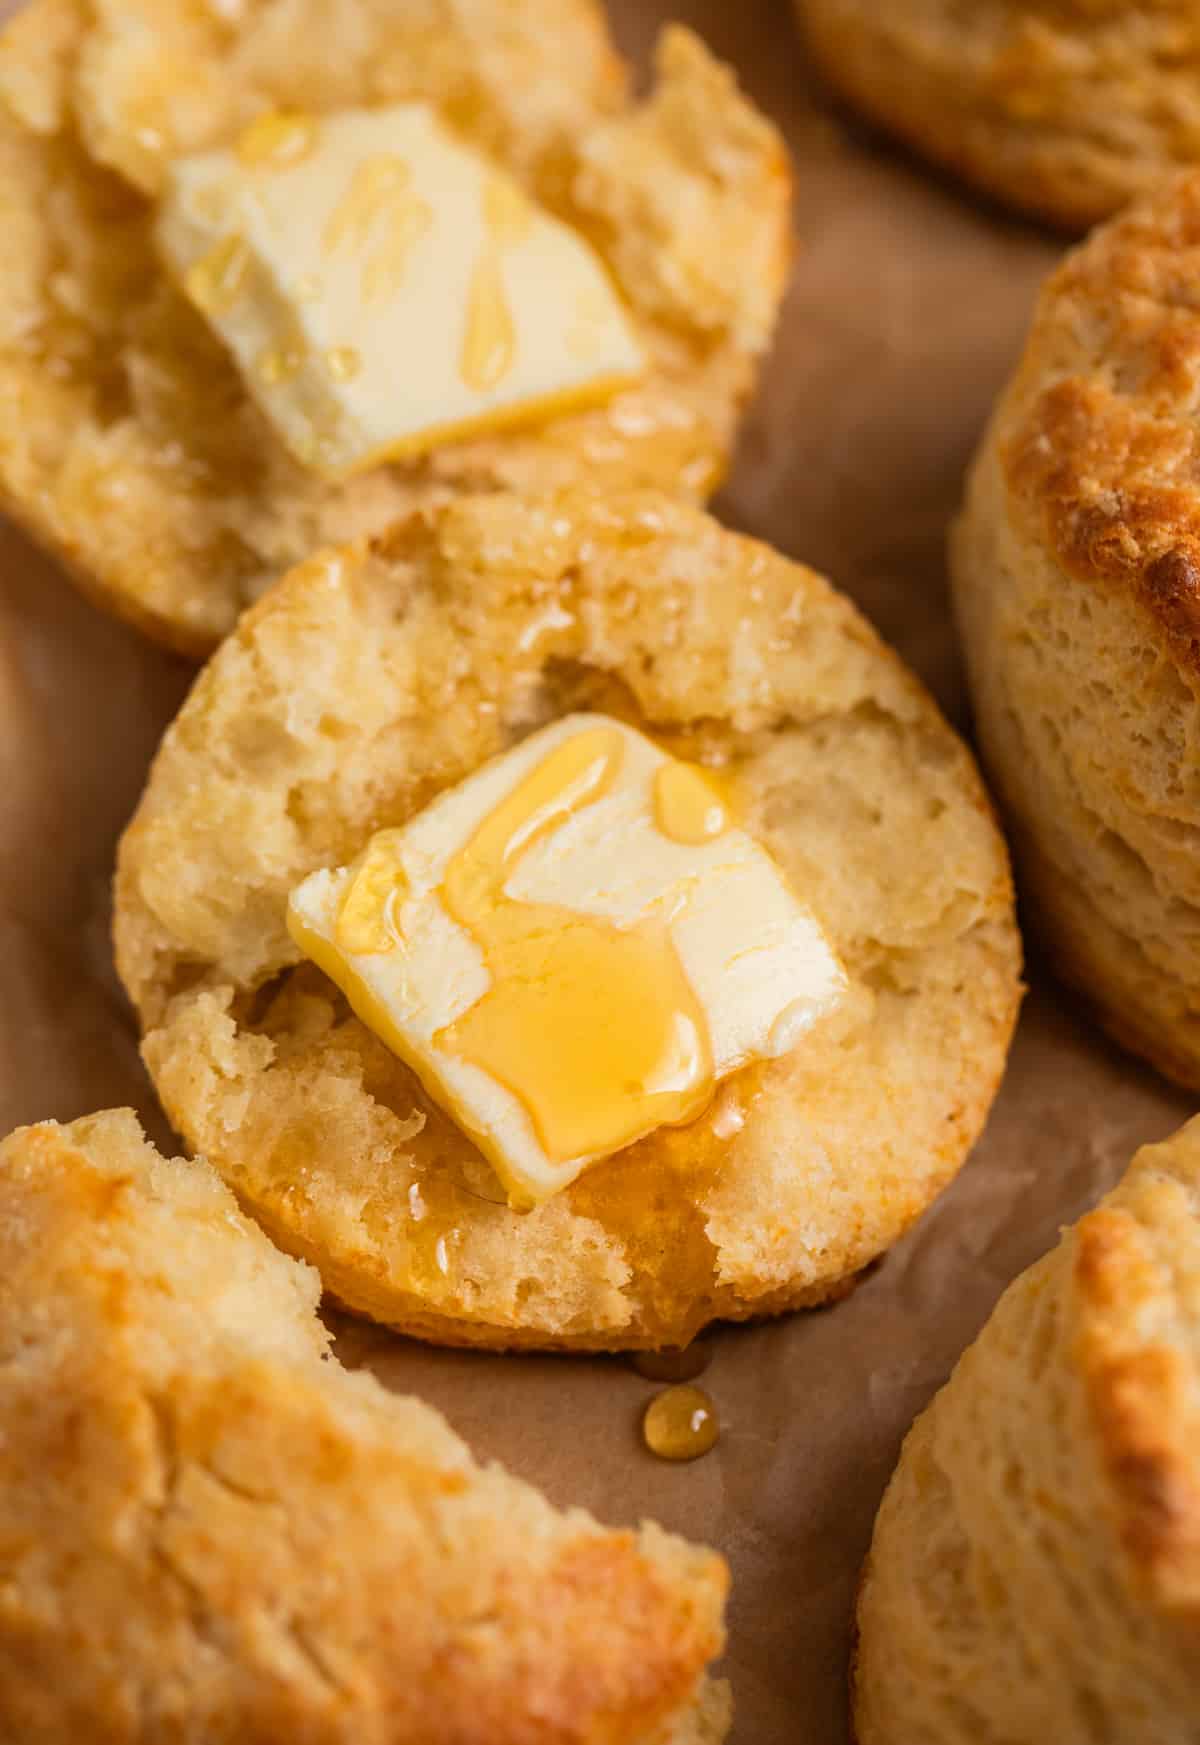 Split honey biscuit with pad of butter and drizzle of honey on top.